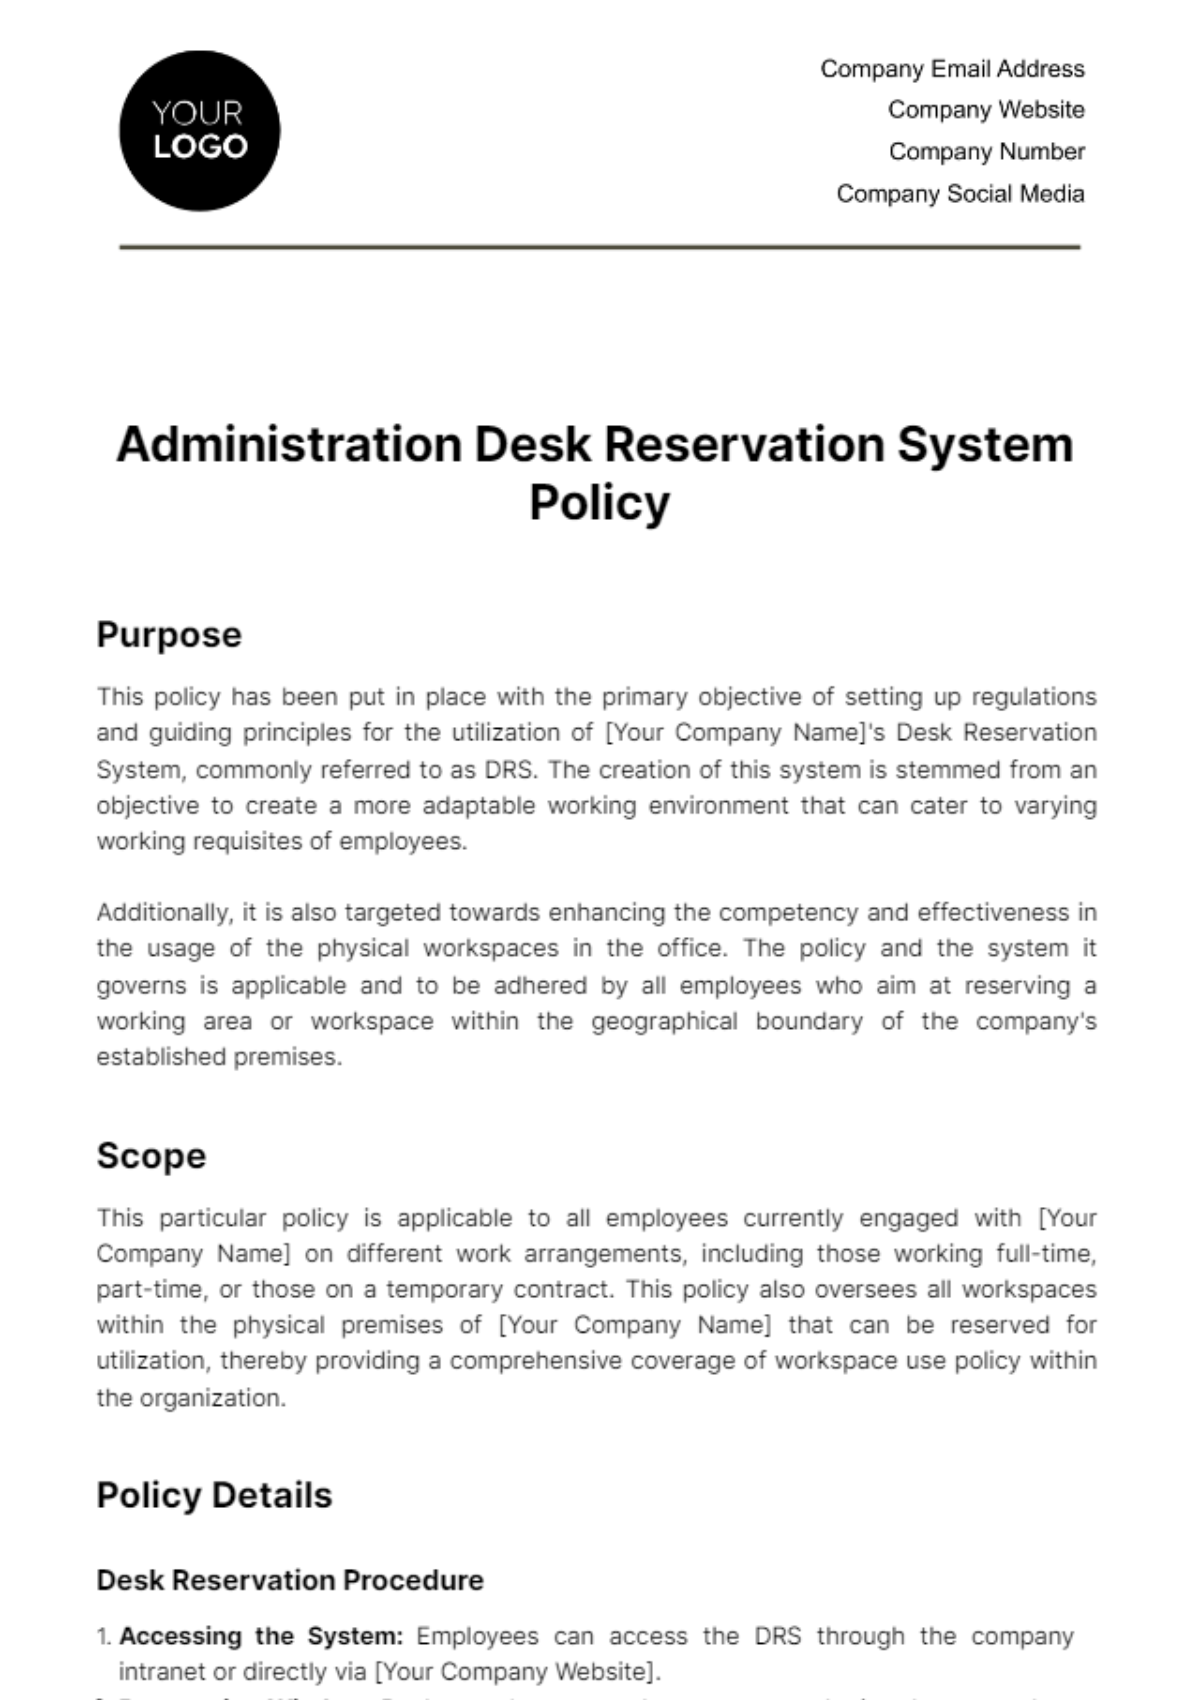 Free Administration Desk Reservation System Policy Template